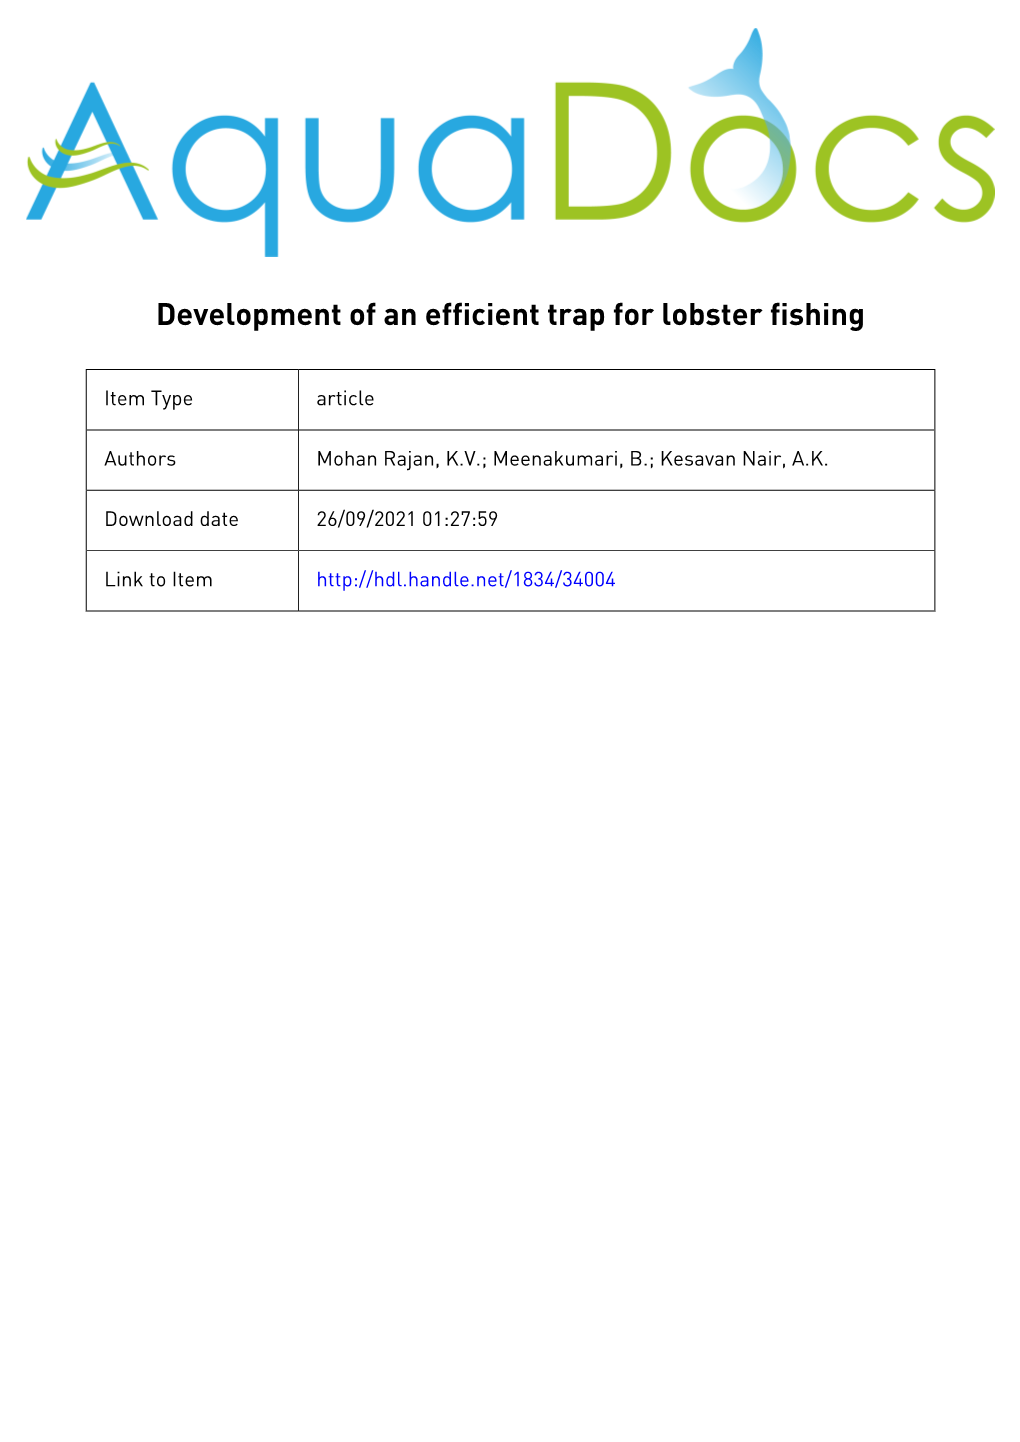 Development of an Efficient Trap for Lobster Fishing